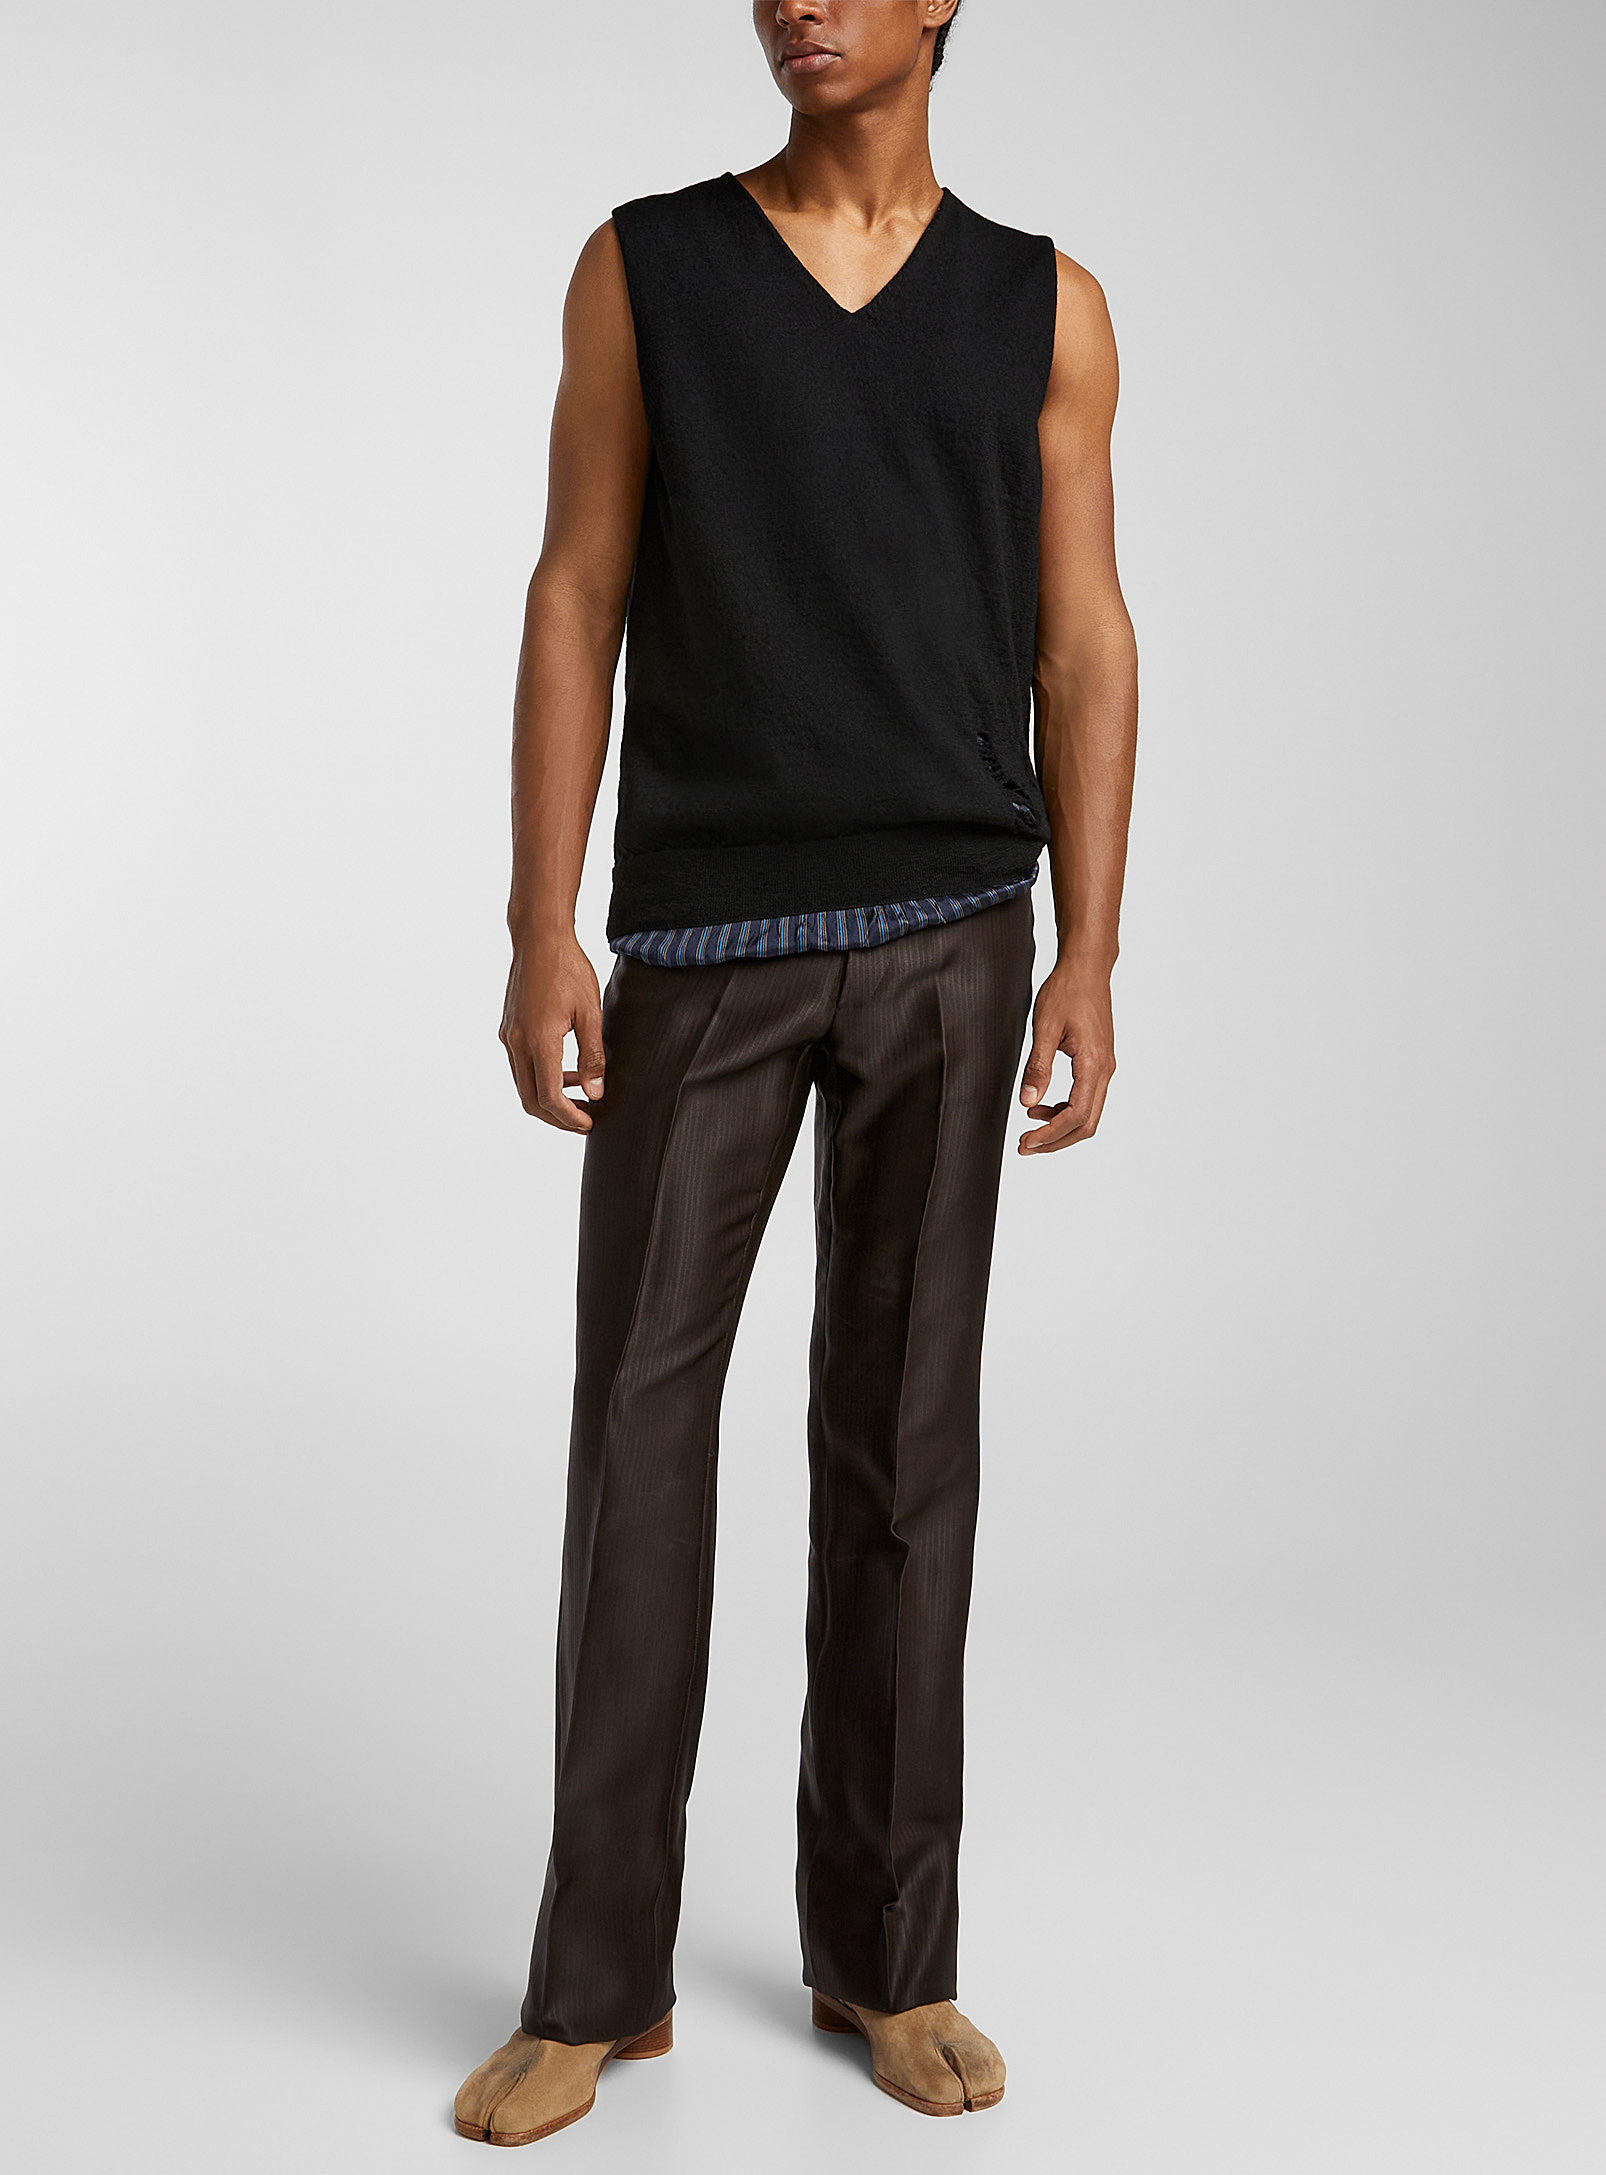 Maison Margiela Wool And Silk Dress Pant In Brown